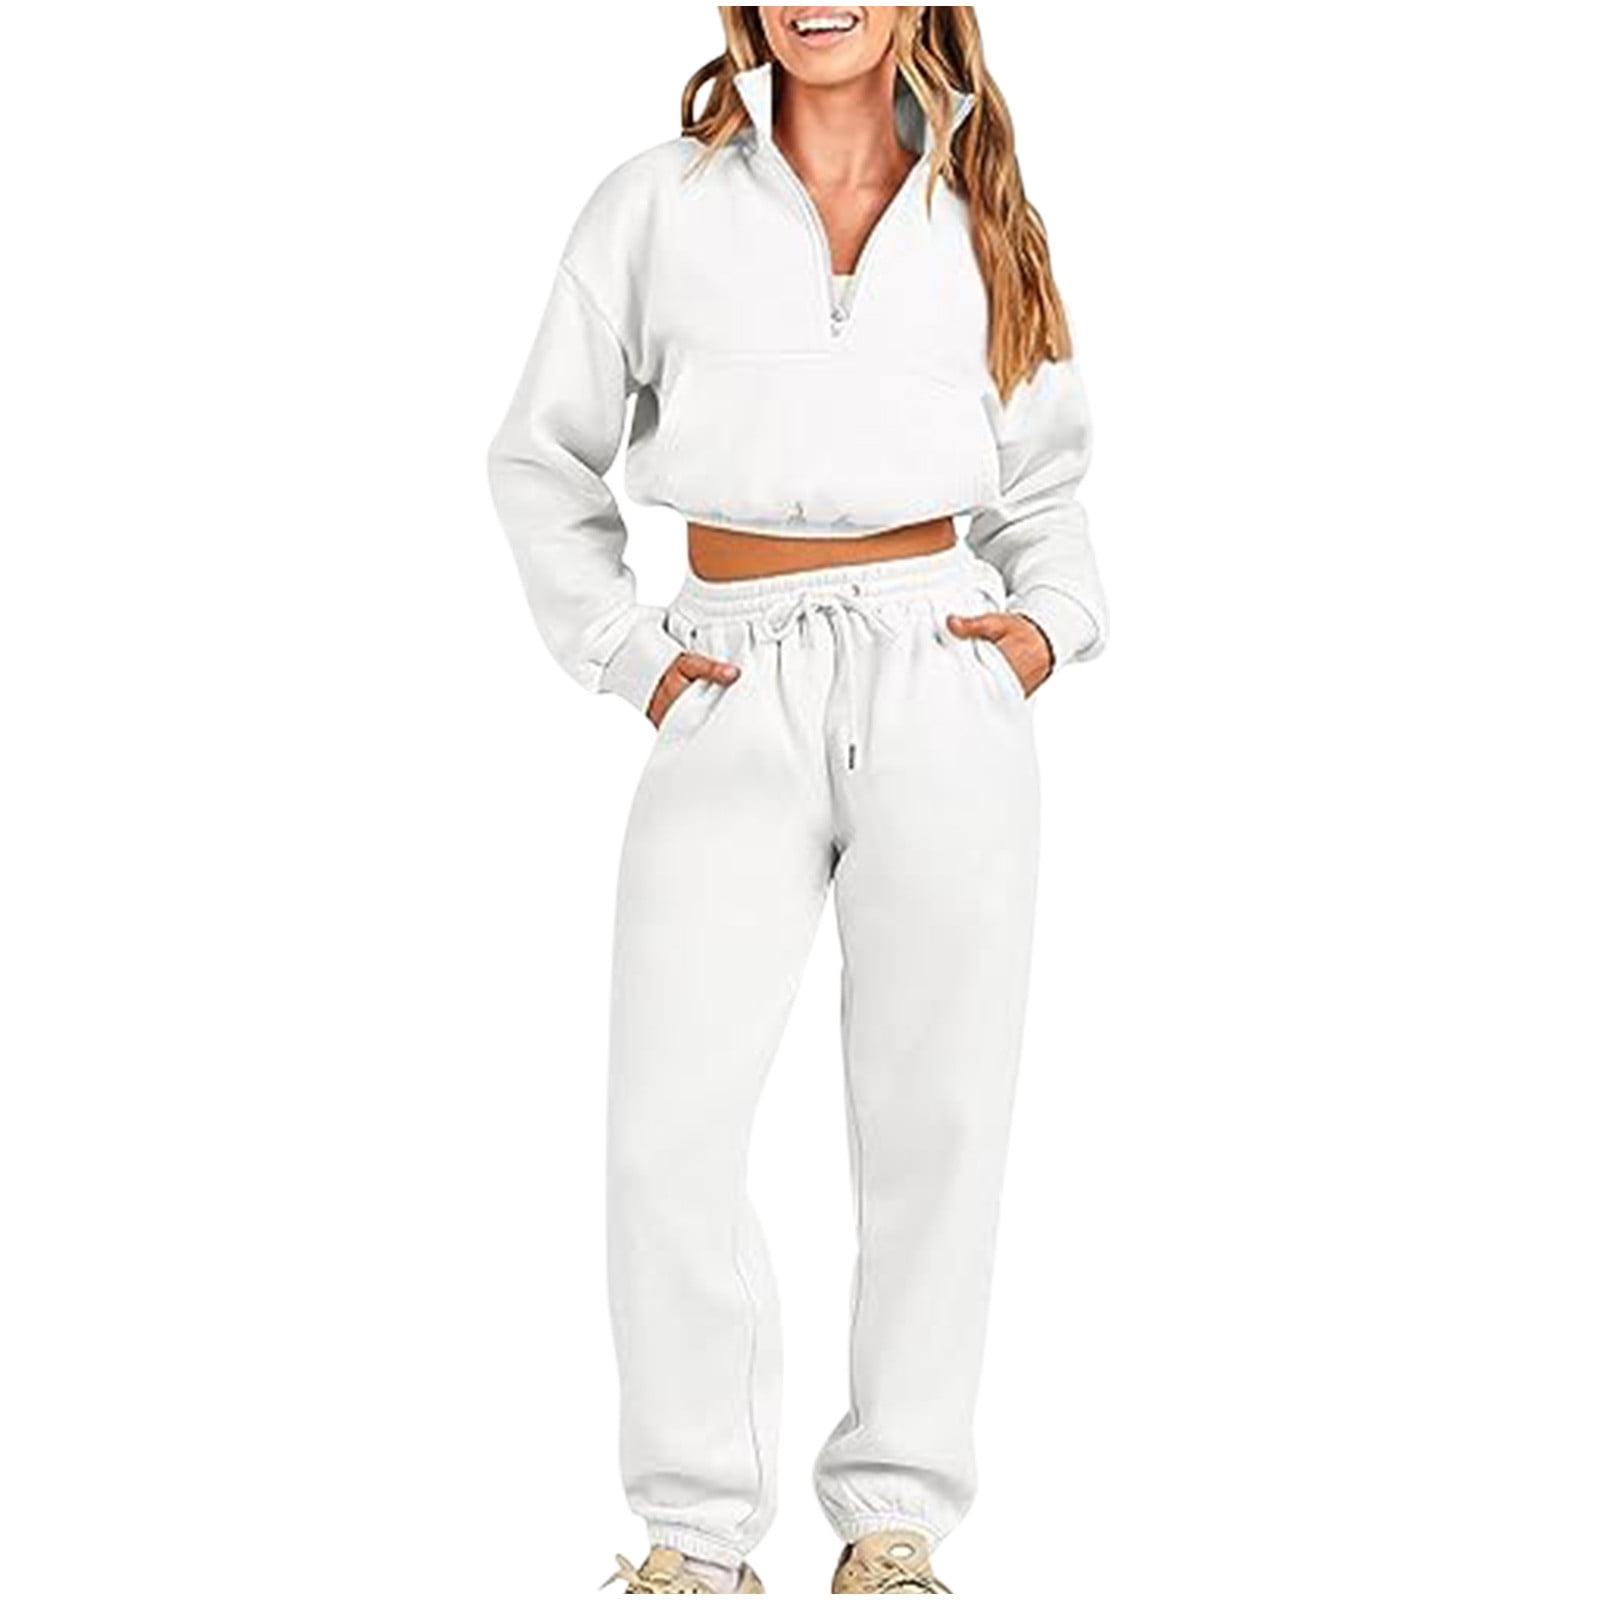 Women 2 Piece Outfits Suits Set,wharehouseopenbox Deals,Day Deals,Warehouse  Clothing,Items Under 10 Dollars,Wish List,Daily Deals of The Day Prime  Today only